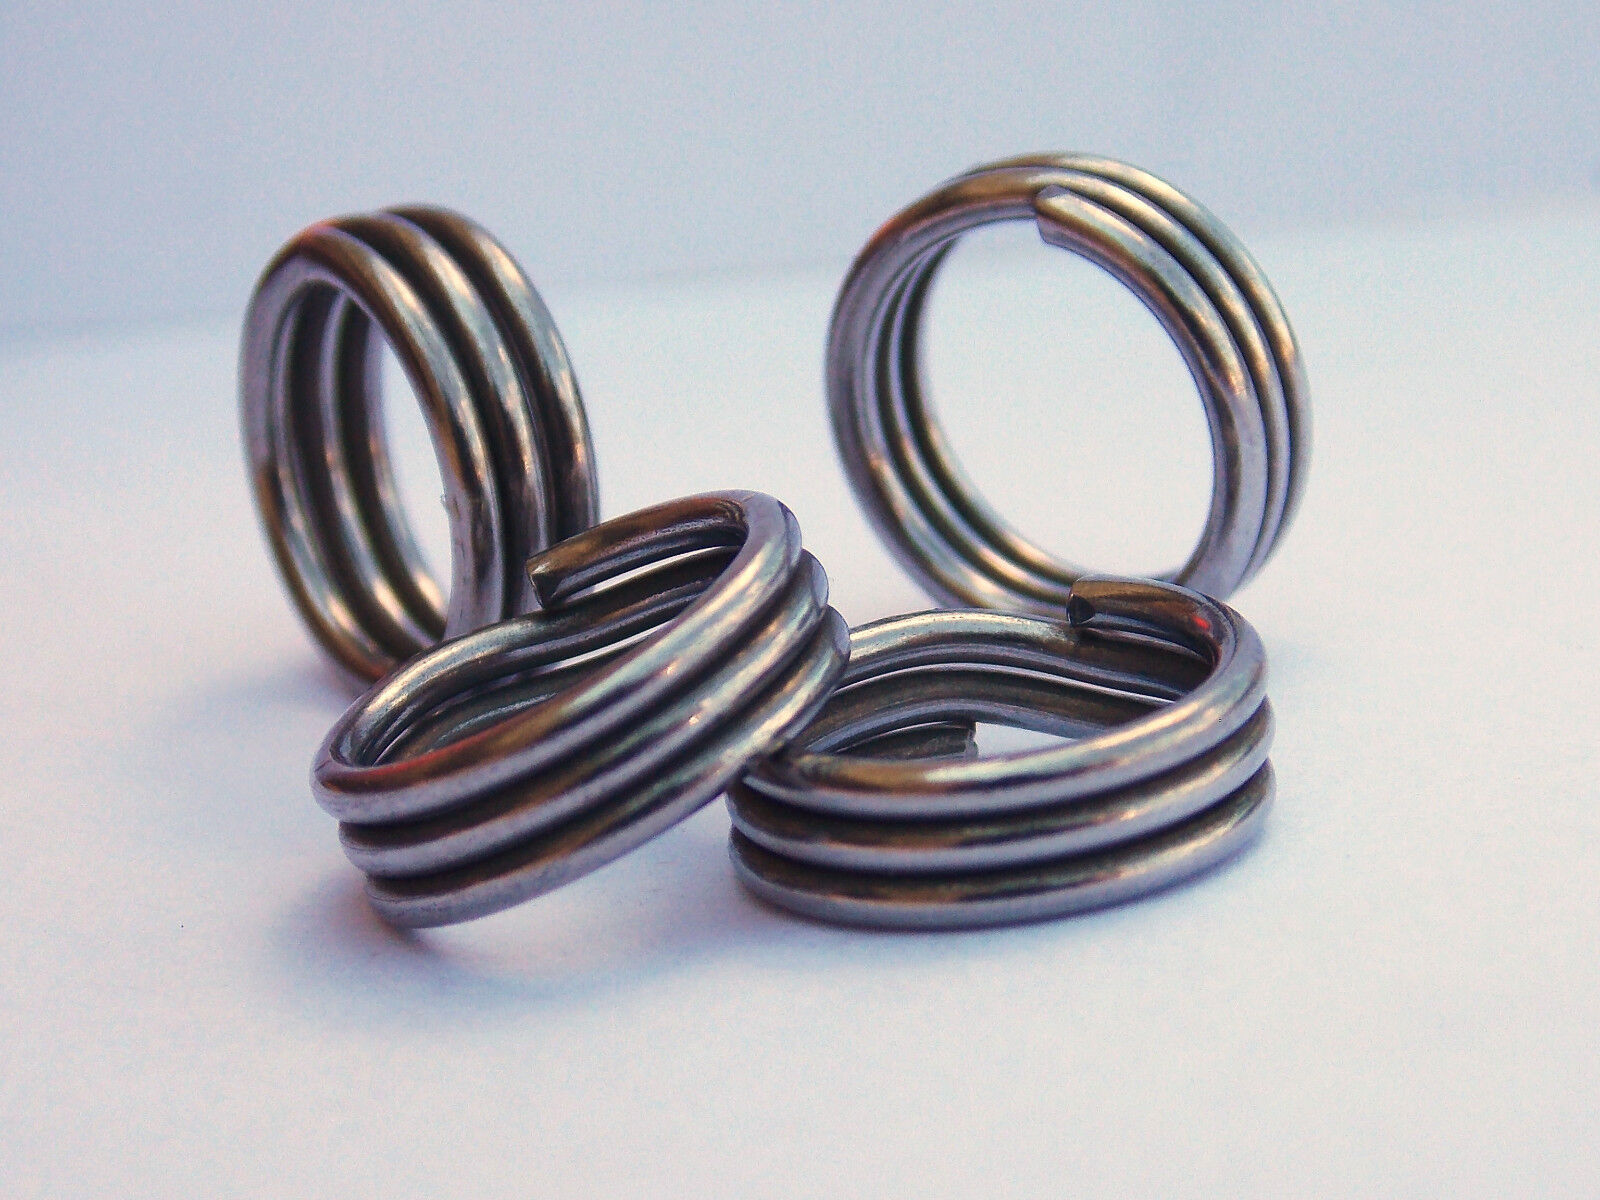 Wolverine Triple Wrap split rings Stainless Steel Pack of 25 pieces Made in USA